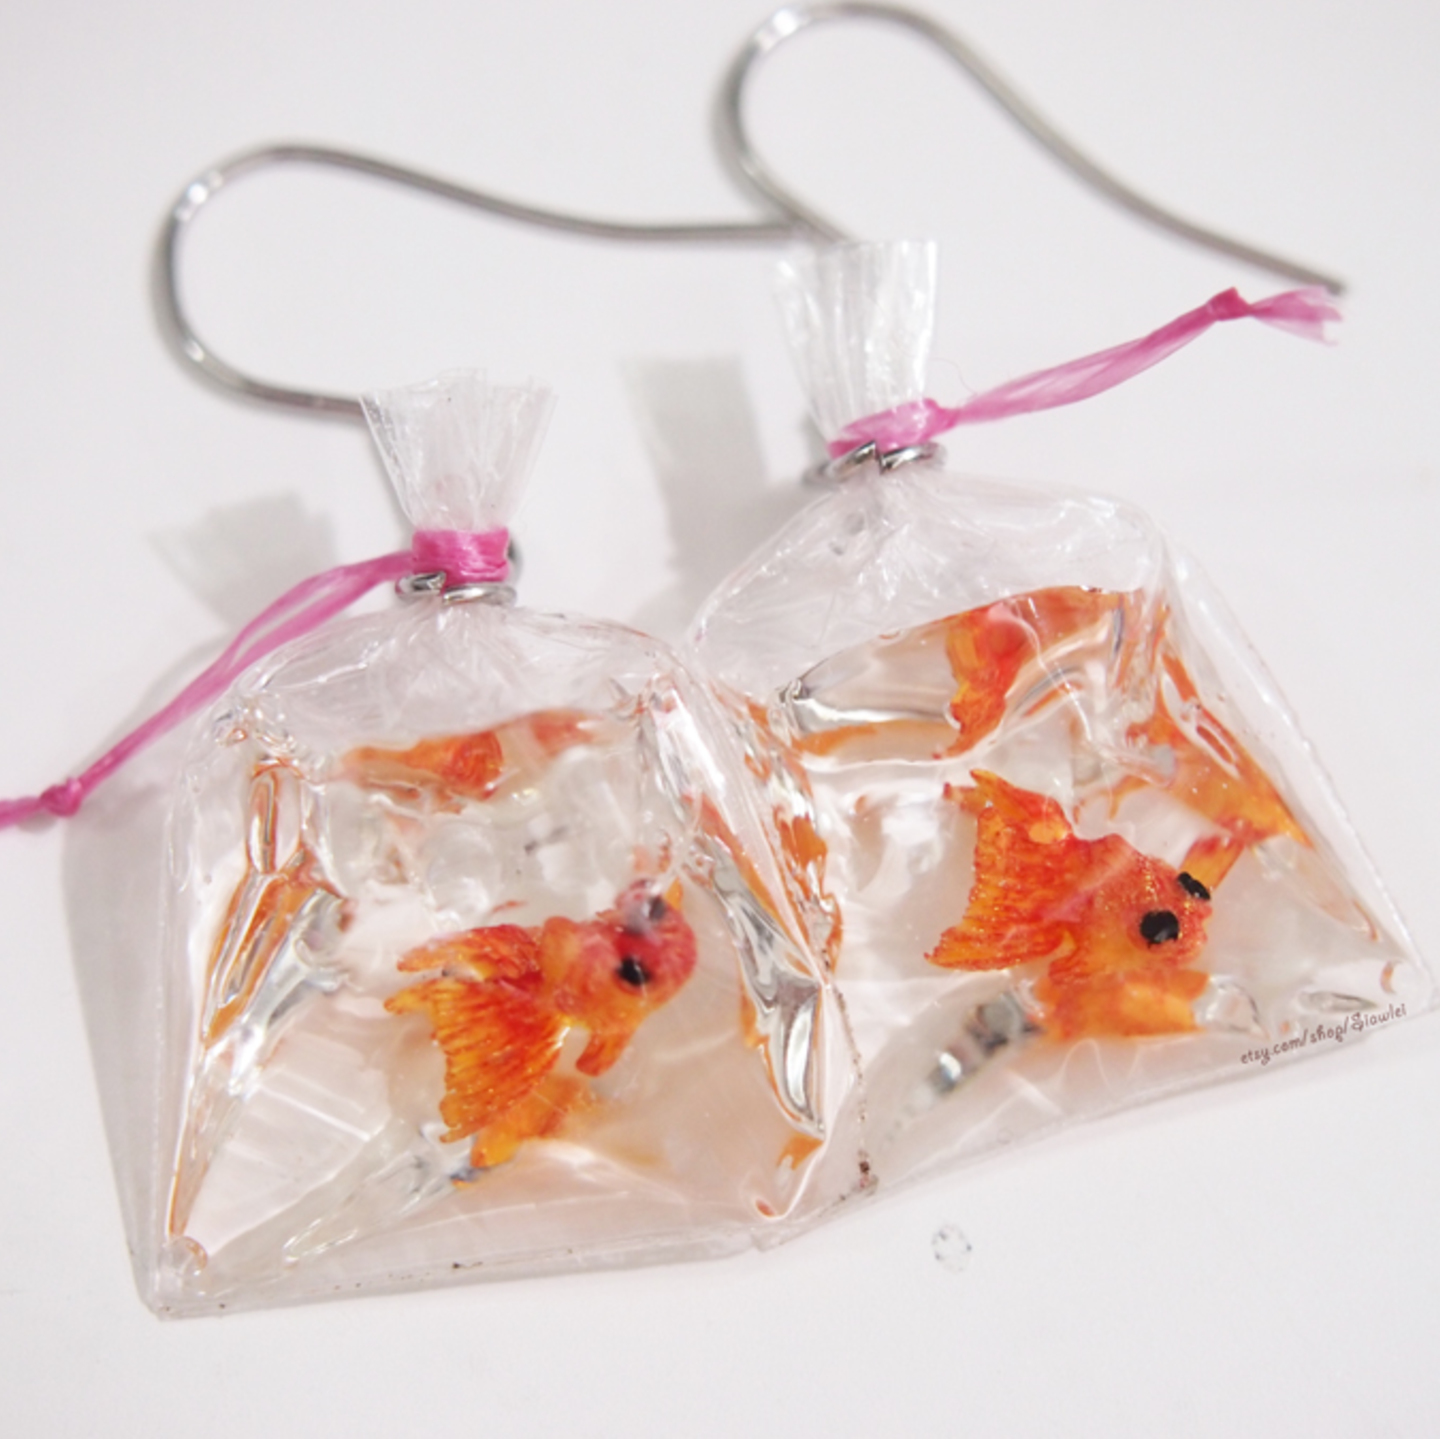 Jewelry-Fish Earrings waterproof and non toxic